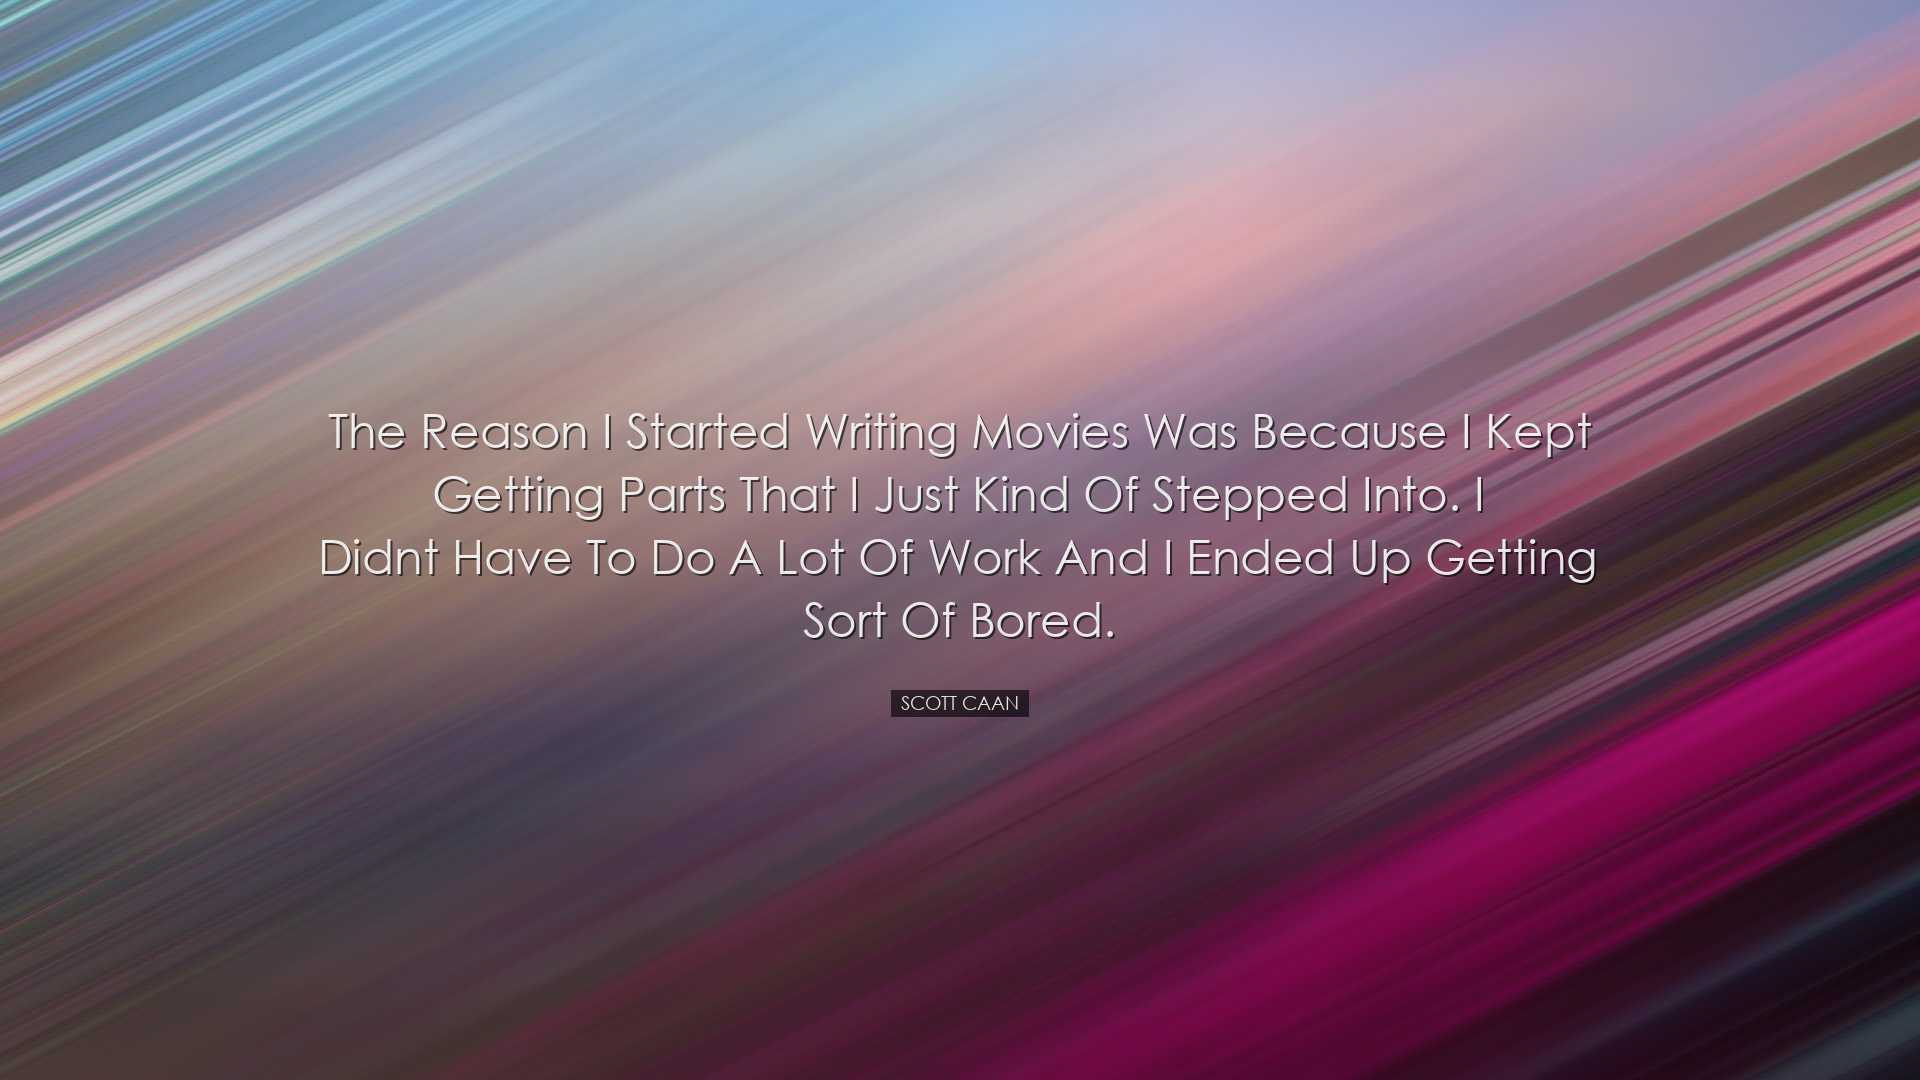 The reason I started writing movies was because I kept getting par